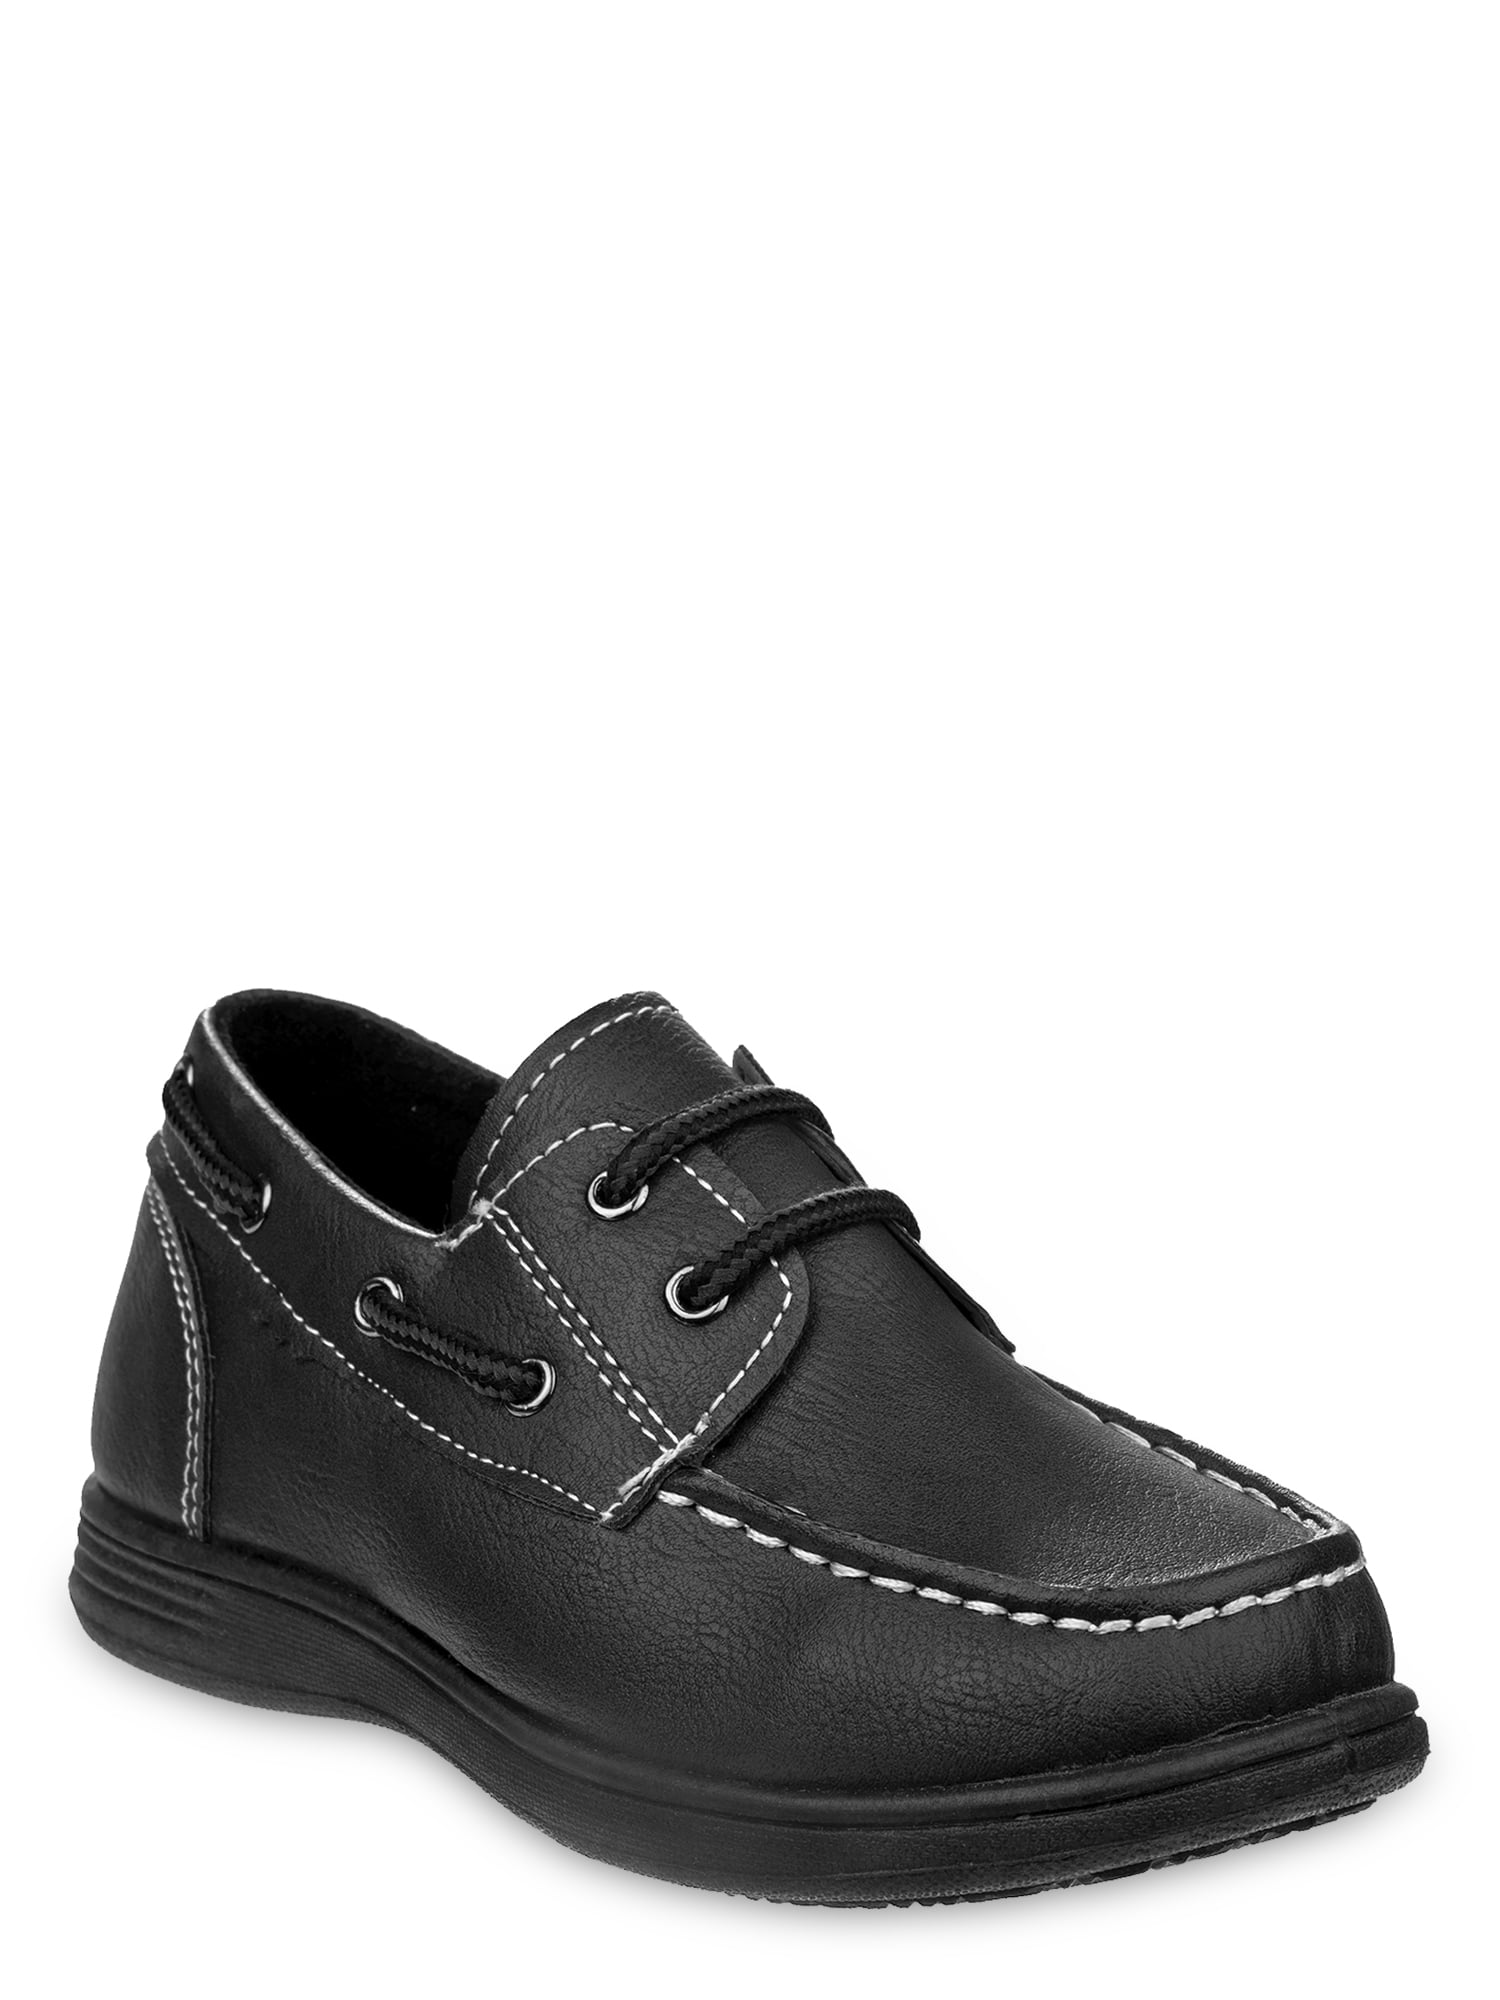 Josmo Casual Loafers Boat Shoes (Boys) - Walmart.com